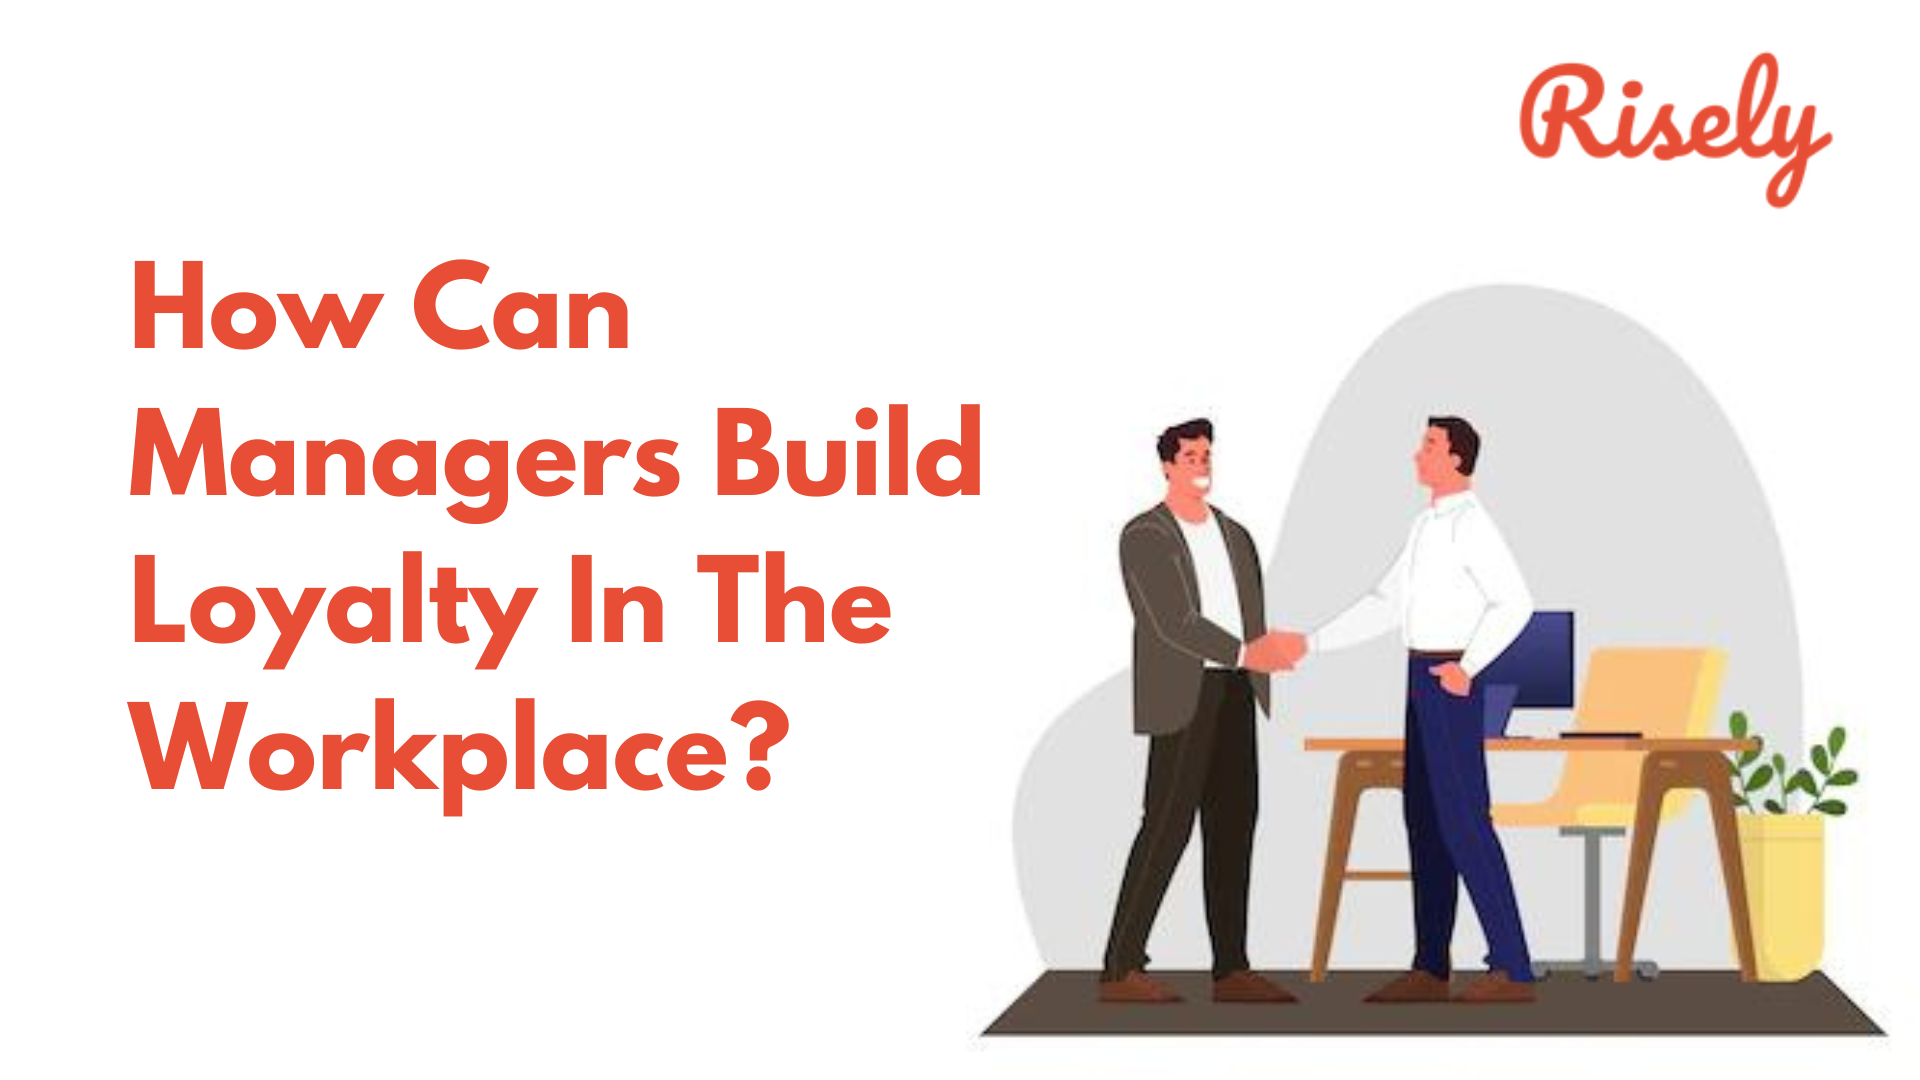 How Can Managers Build Loyalty In The Workplace?